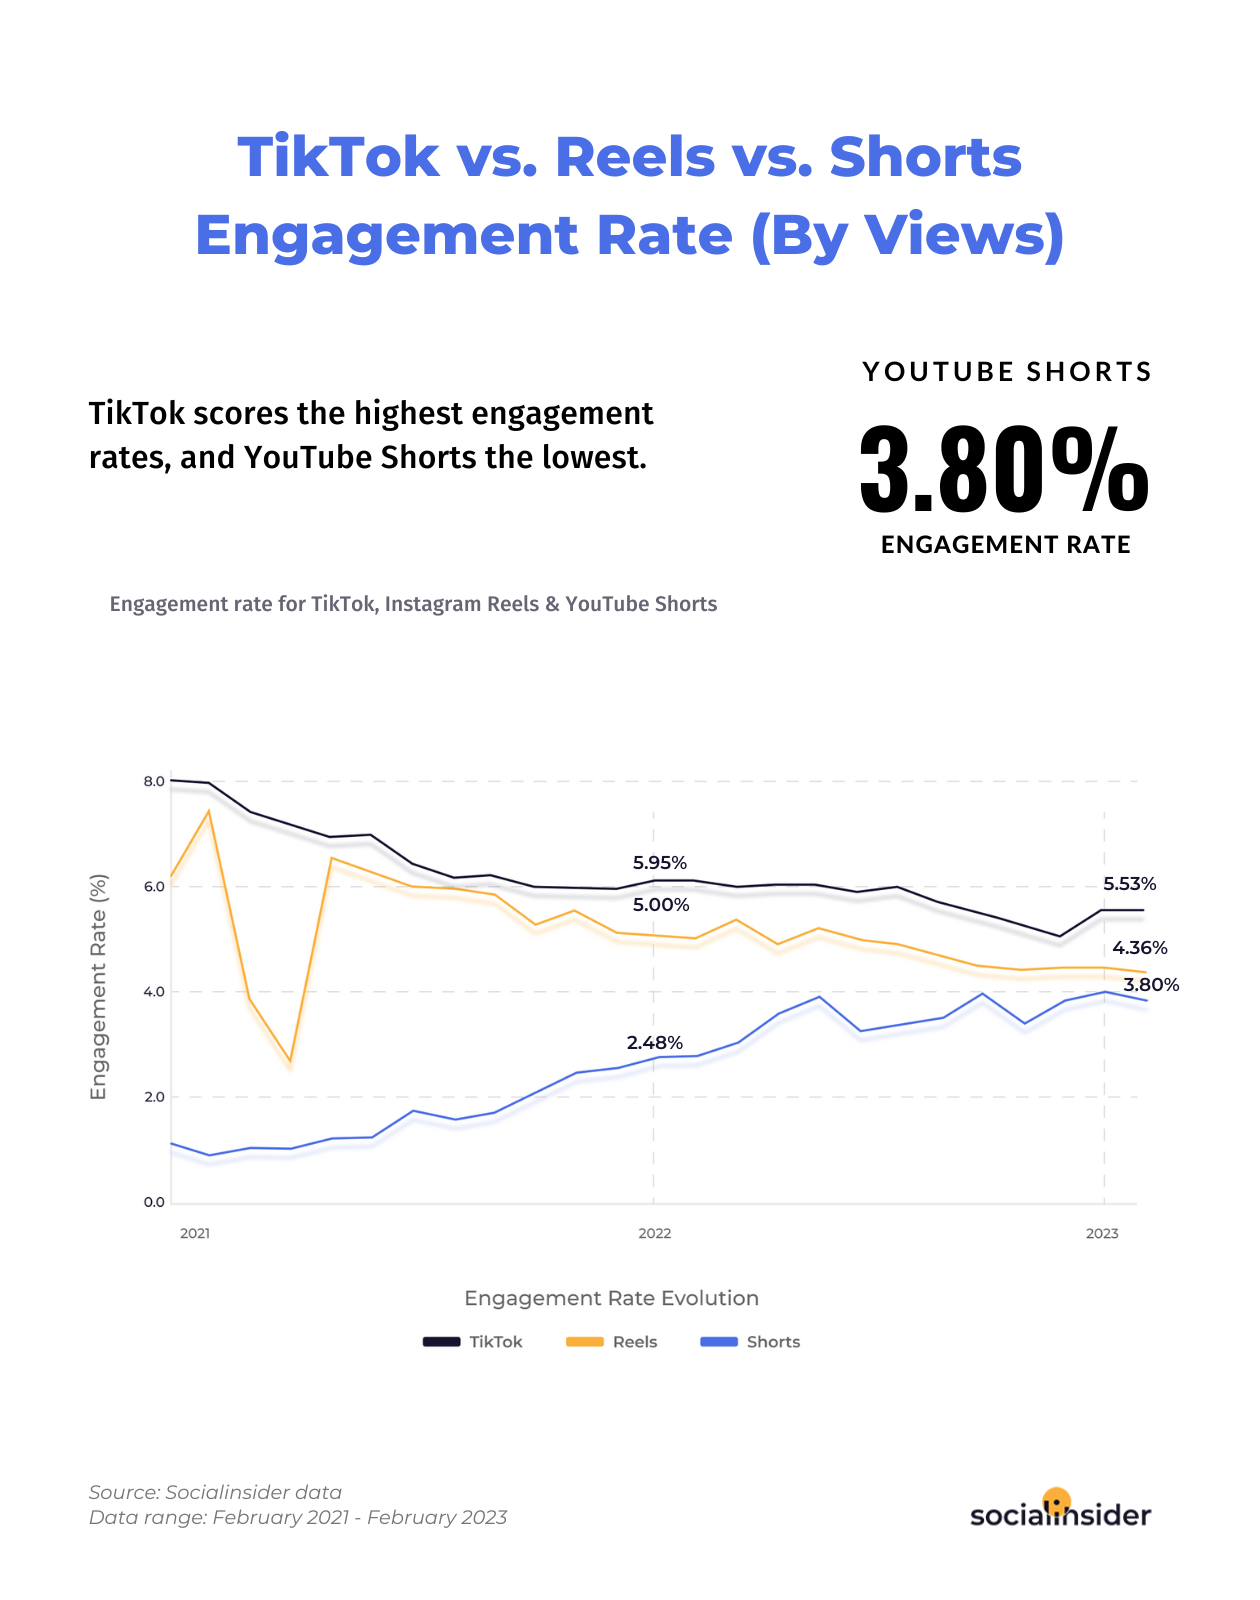 This is a chart indicating TikTok vs Reels vs Shorts engagement statistics over the past three years.